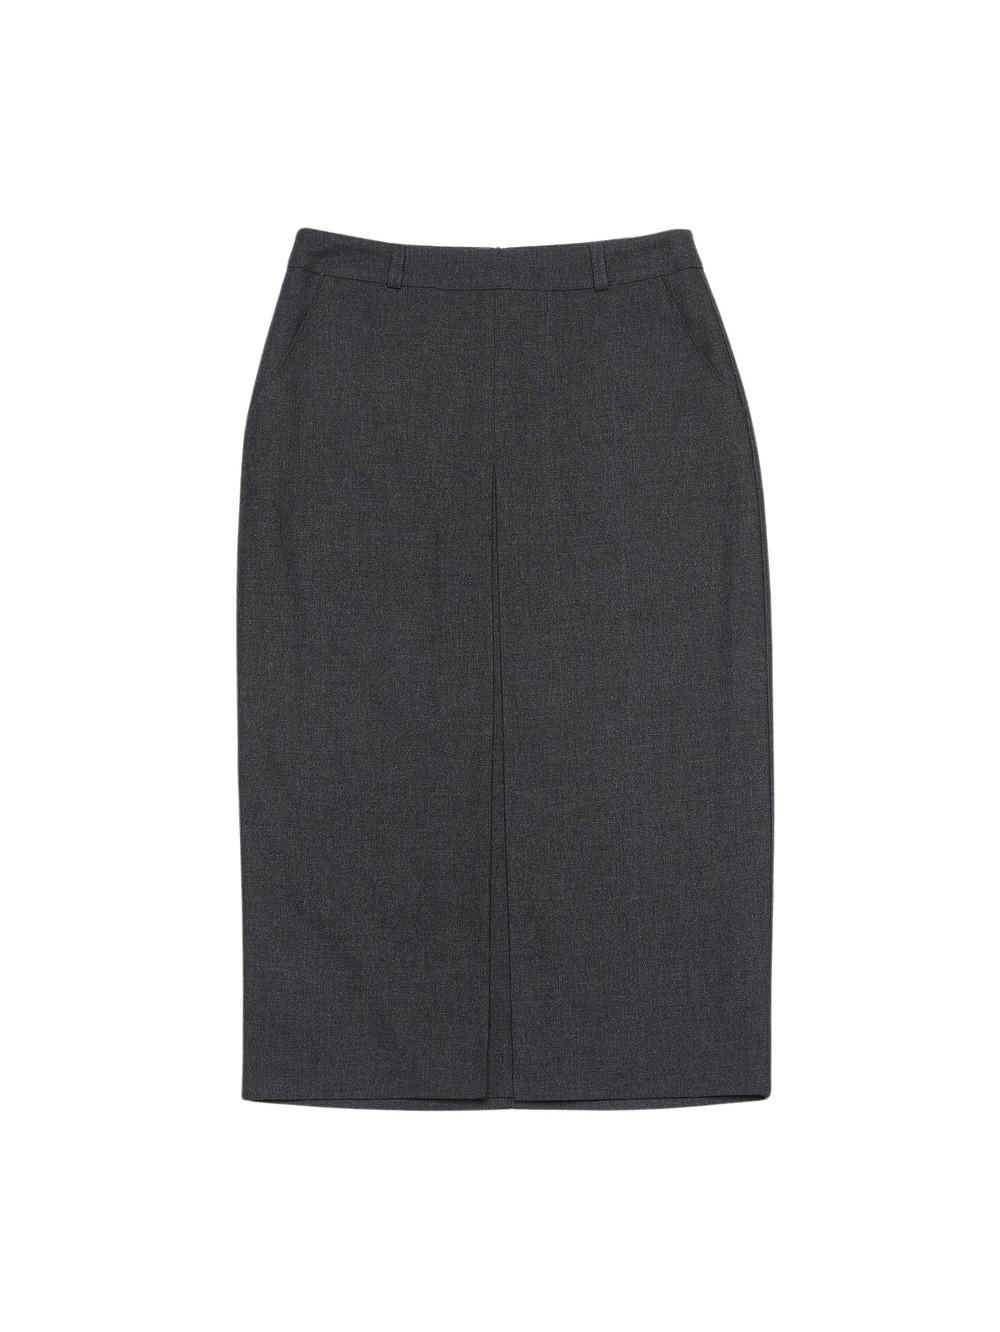 FRONT TUCK SKIRT (2color)